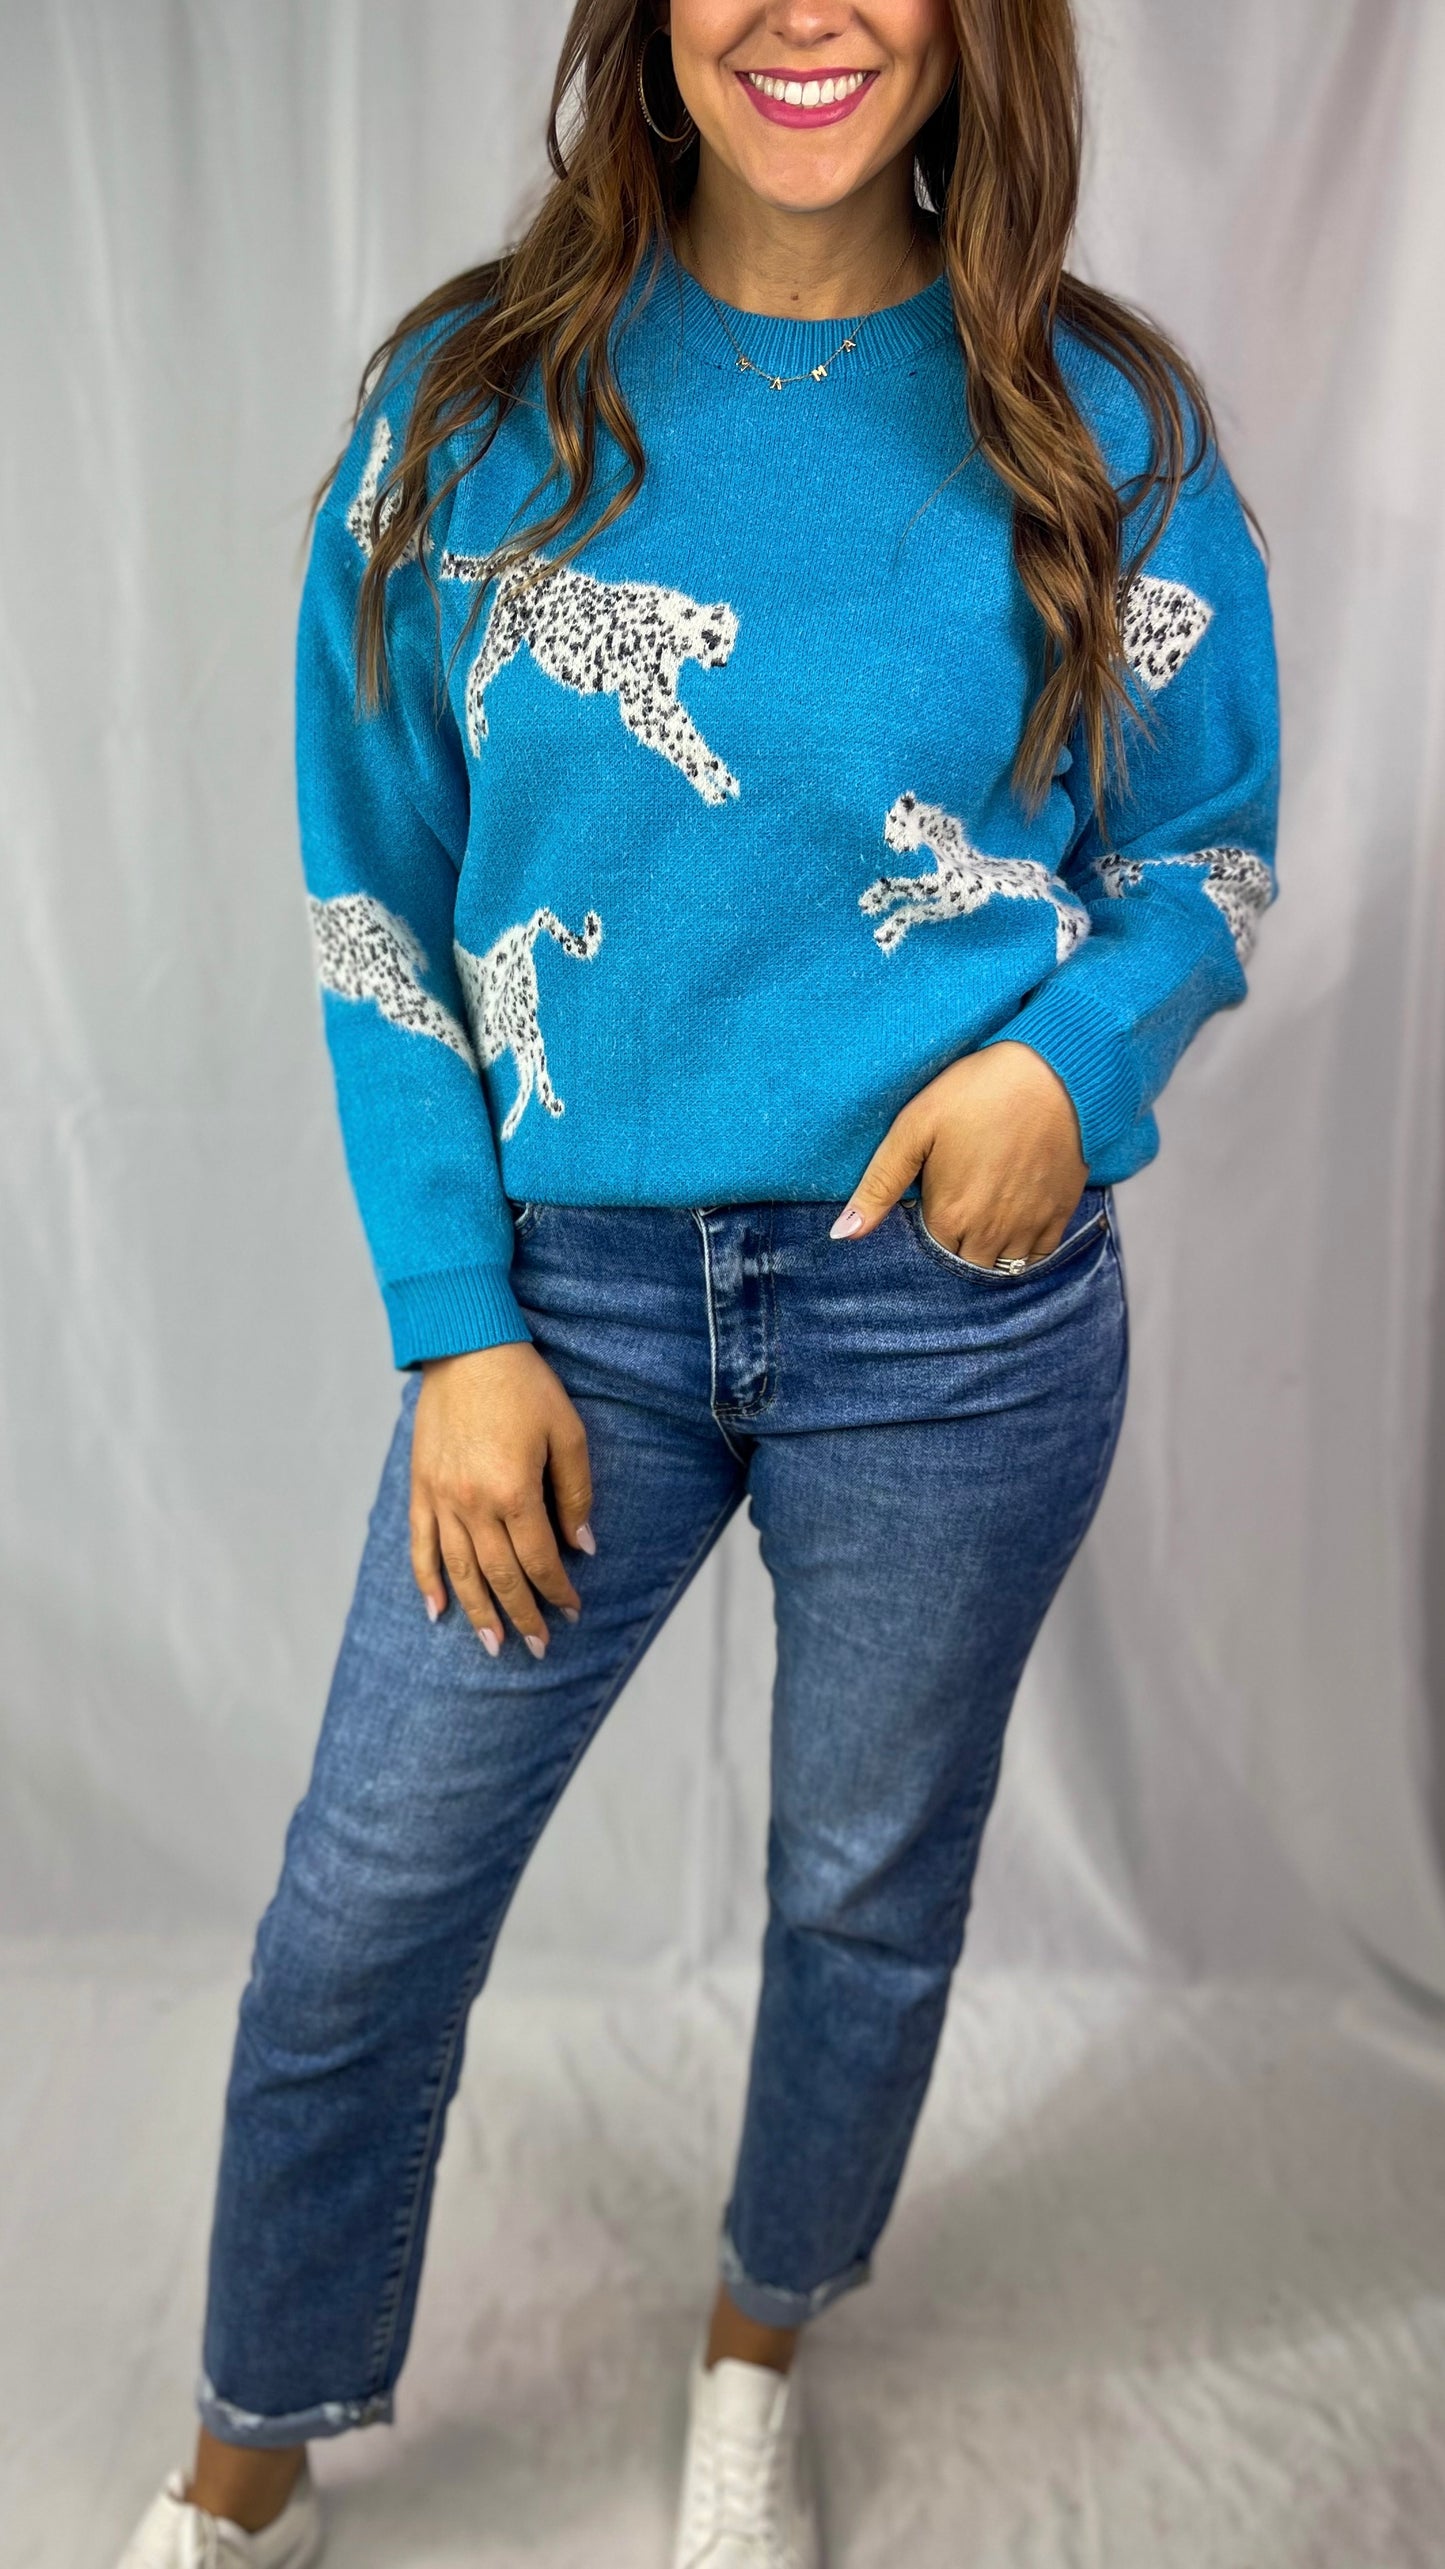 Wild Hearts Teal Blue Sweater